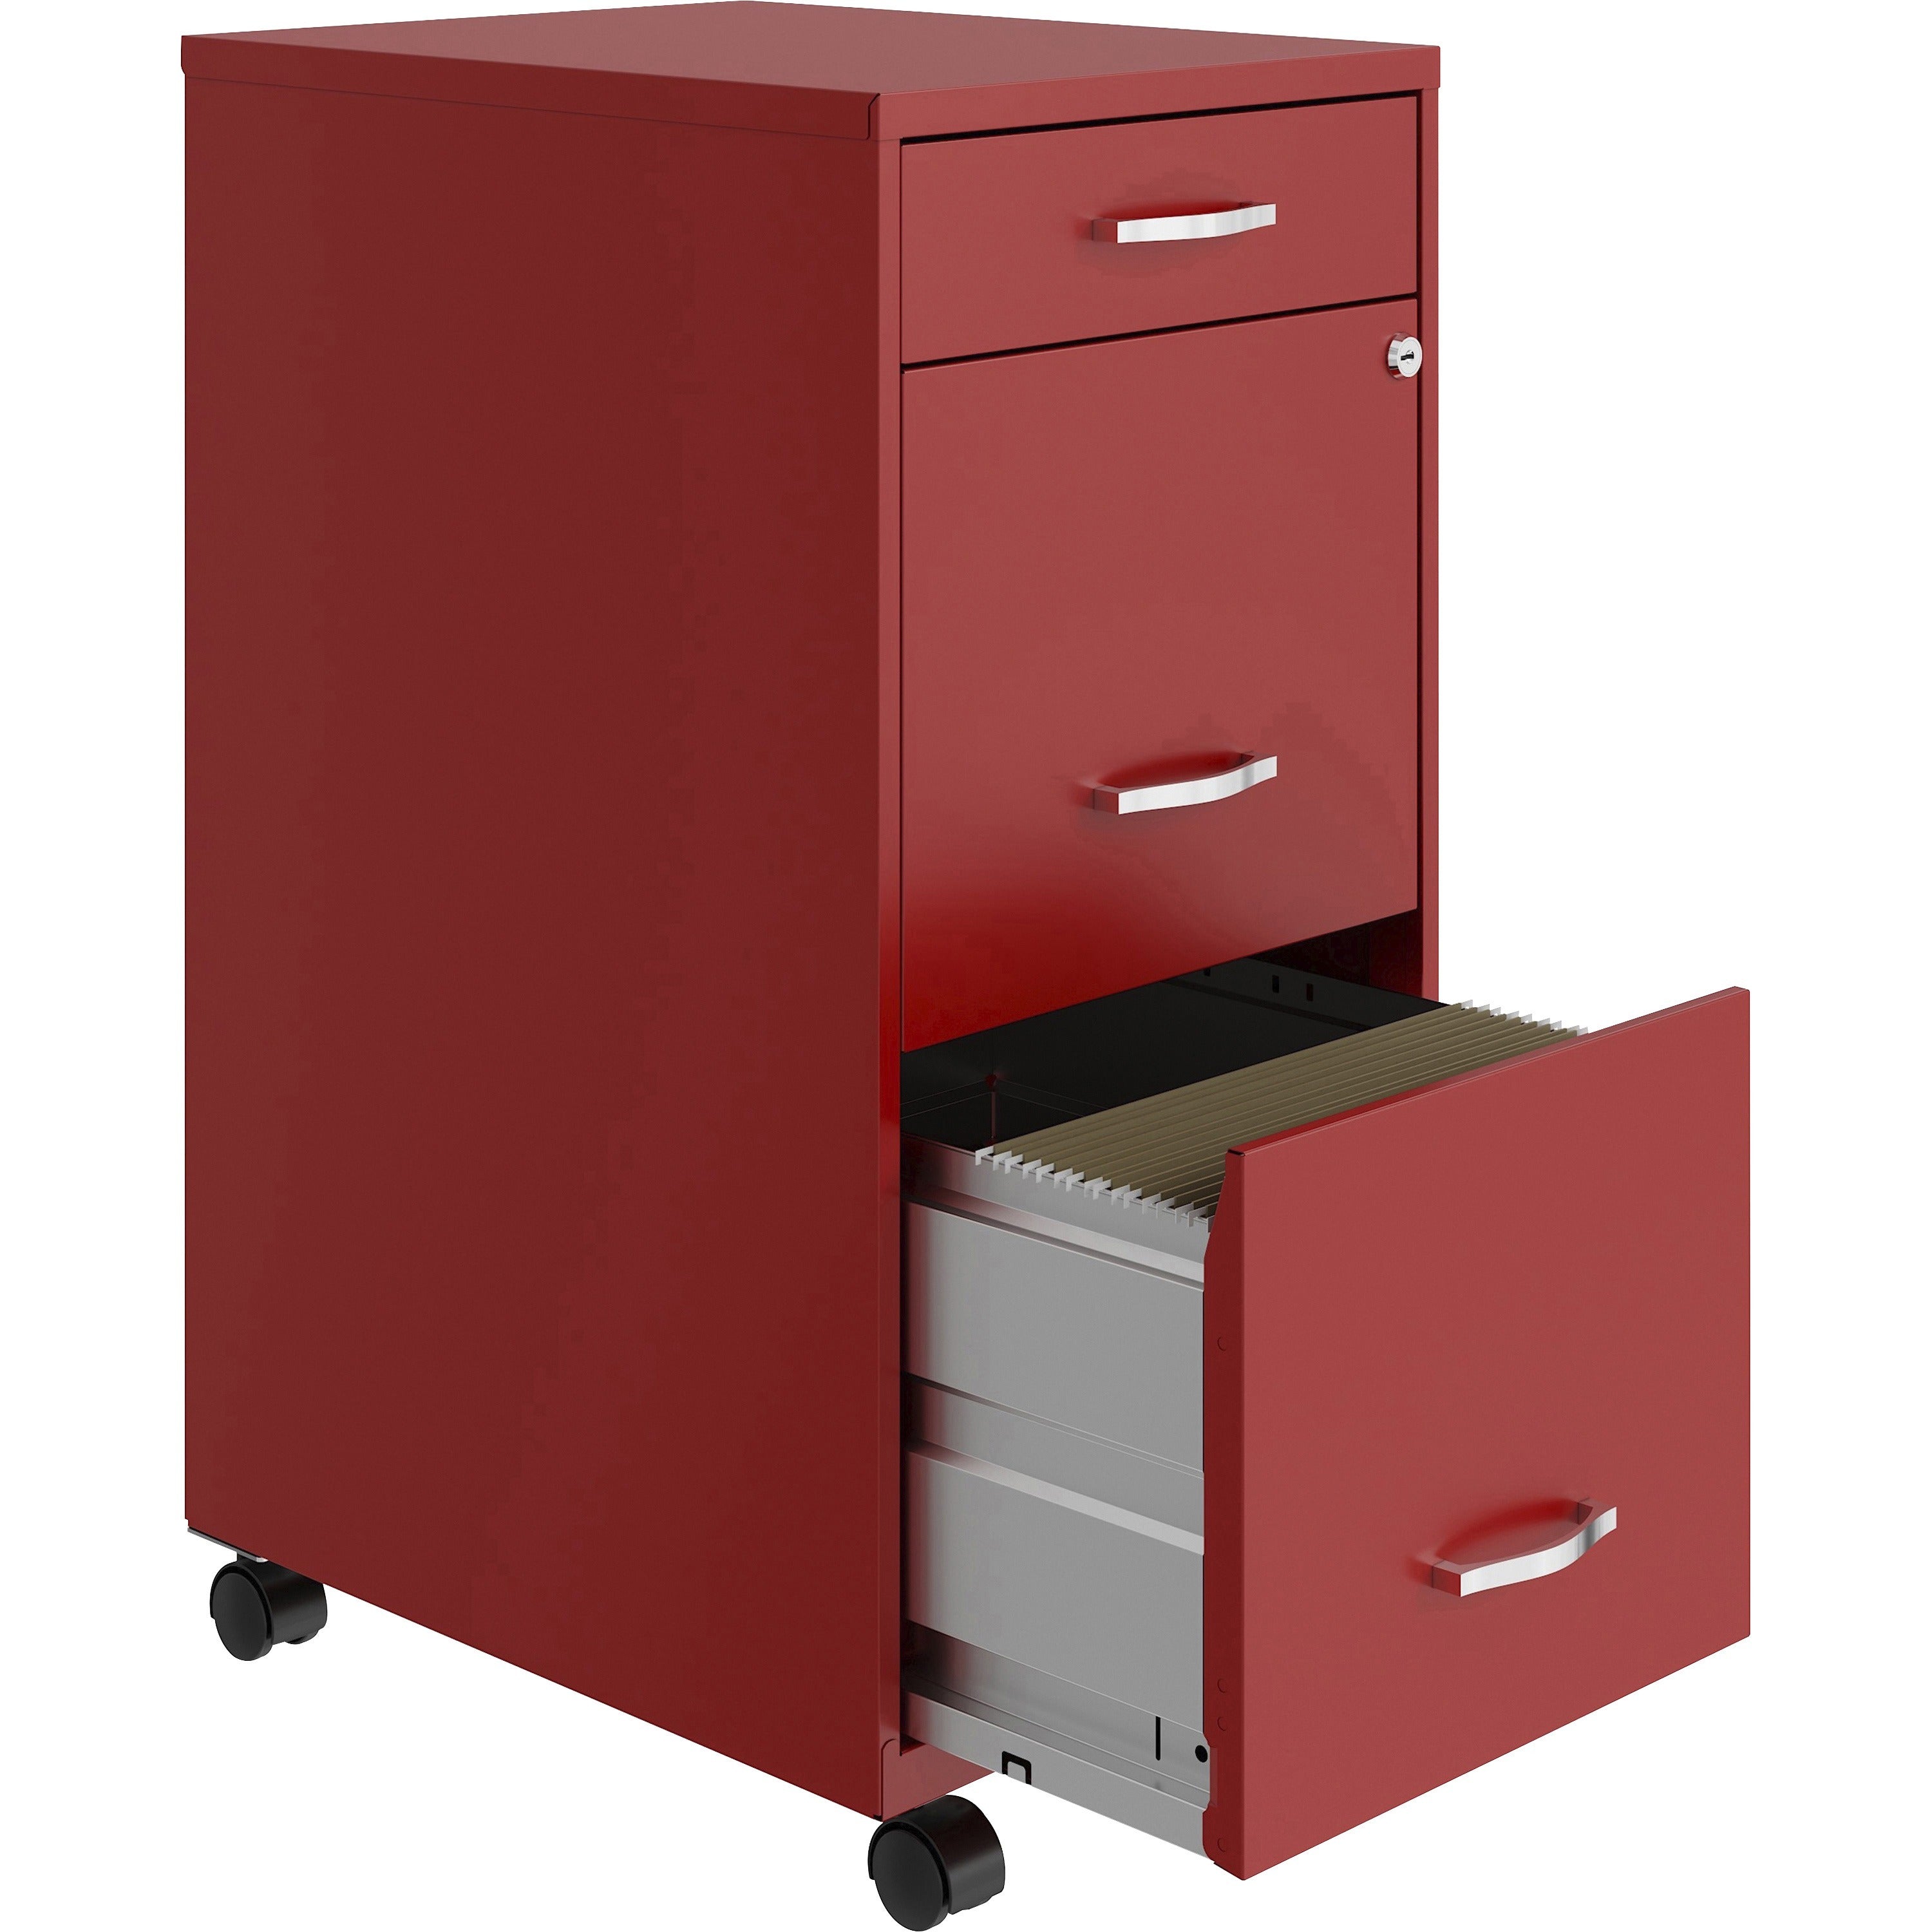 nusparc-mobile-file-cabinet-142-x-18-x-295-3-x-drawers-for-file-box-letter-mobility-locking-drawer-glide-suspension-3-4-drawer-extension-cam-lock-nonporous-surface-red-painted-steel-recycled_nprvf318bmrd - 4